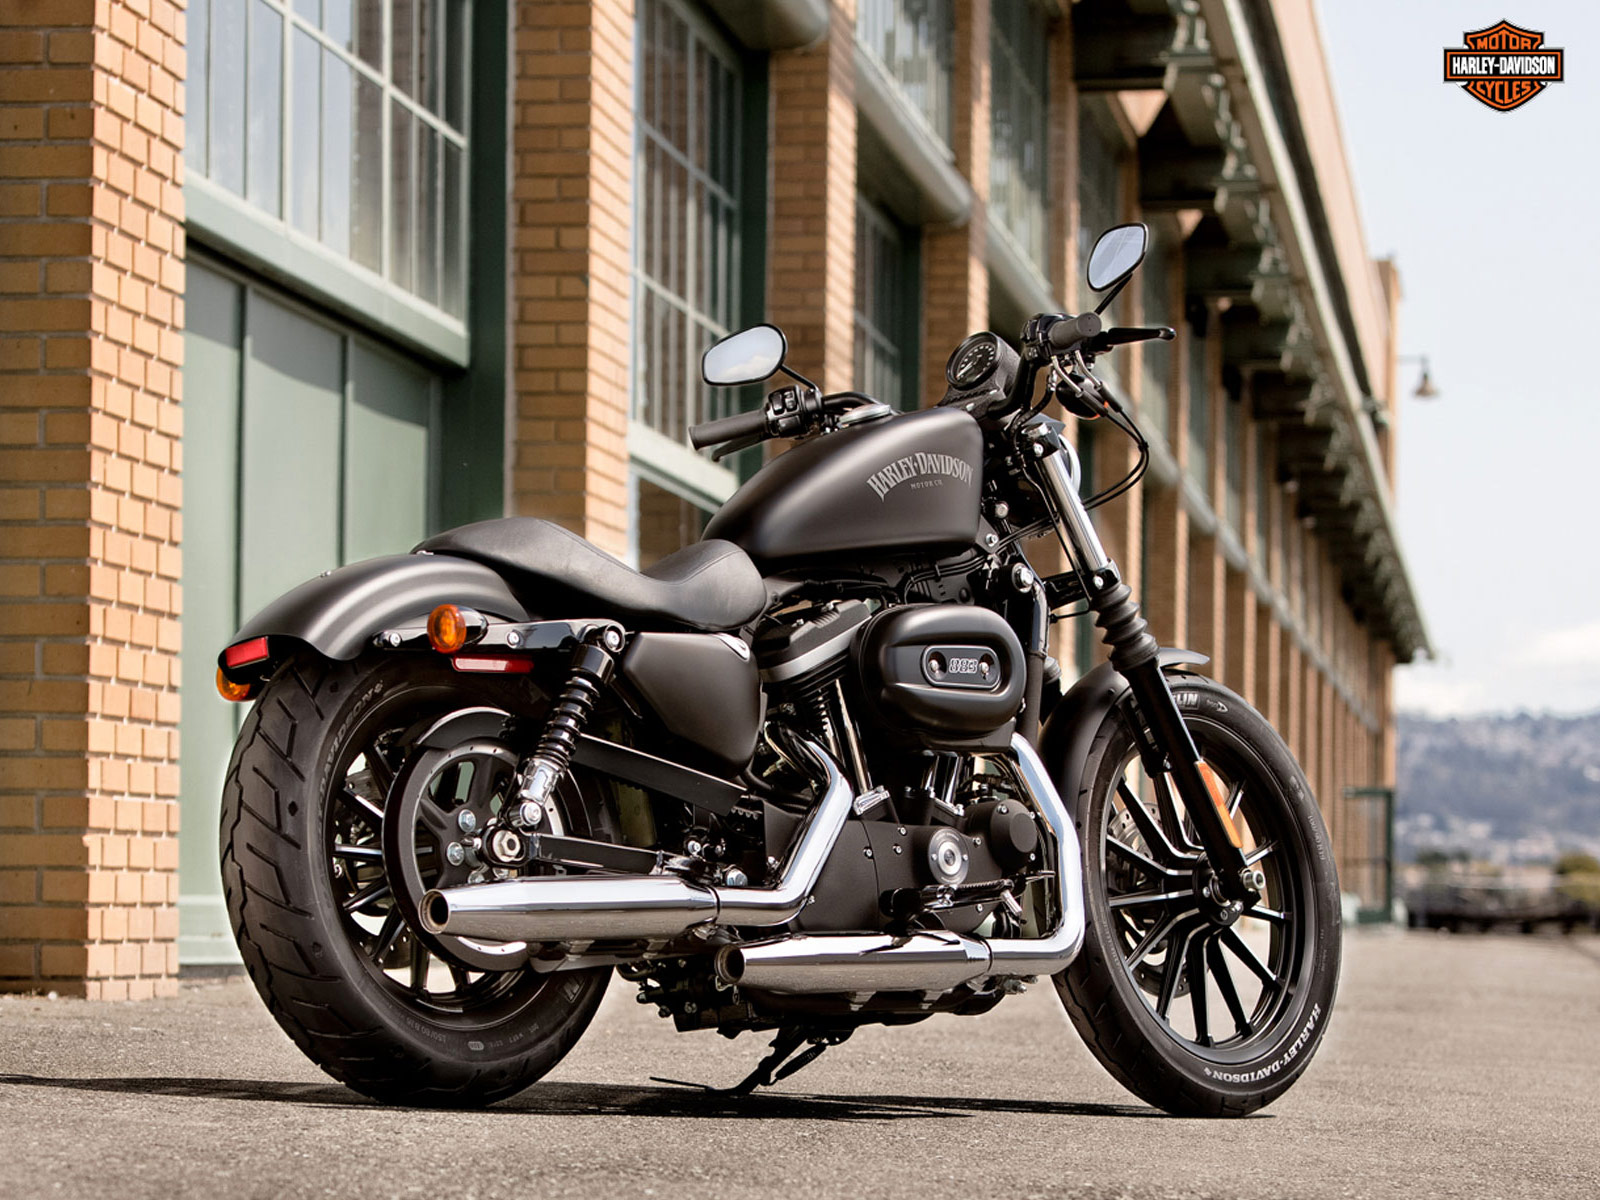 2013 XL883N Iron 883 HarleyDavidson pictures, specifications